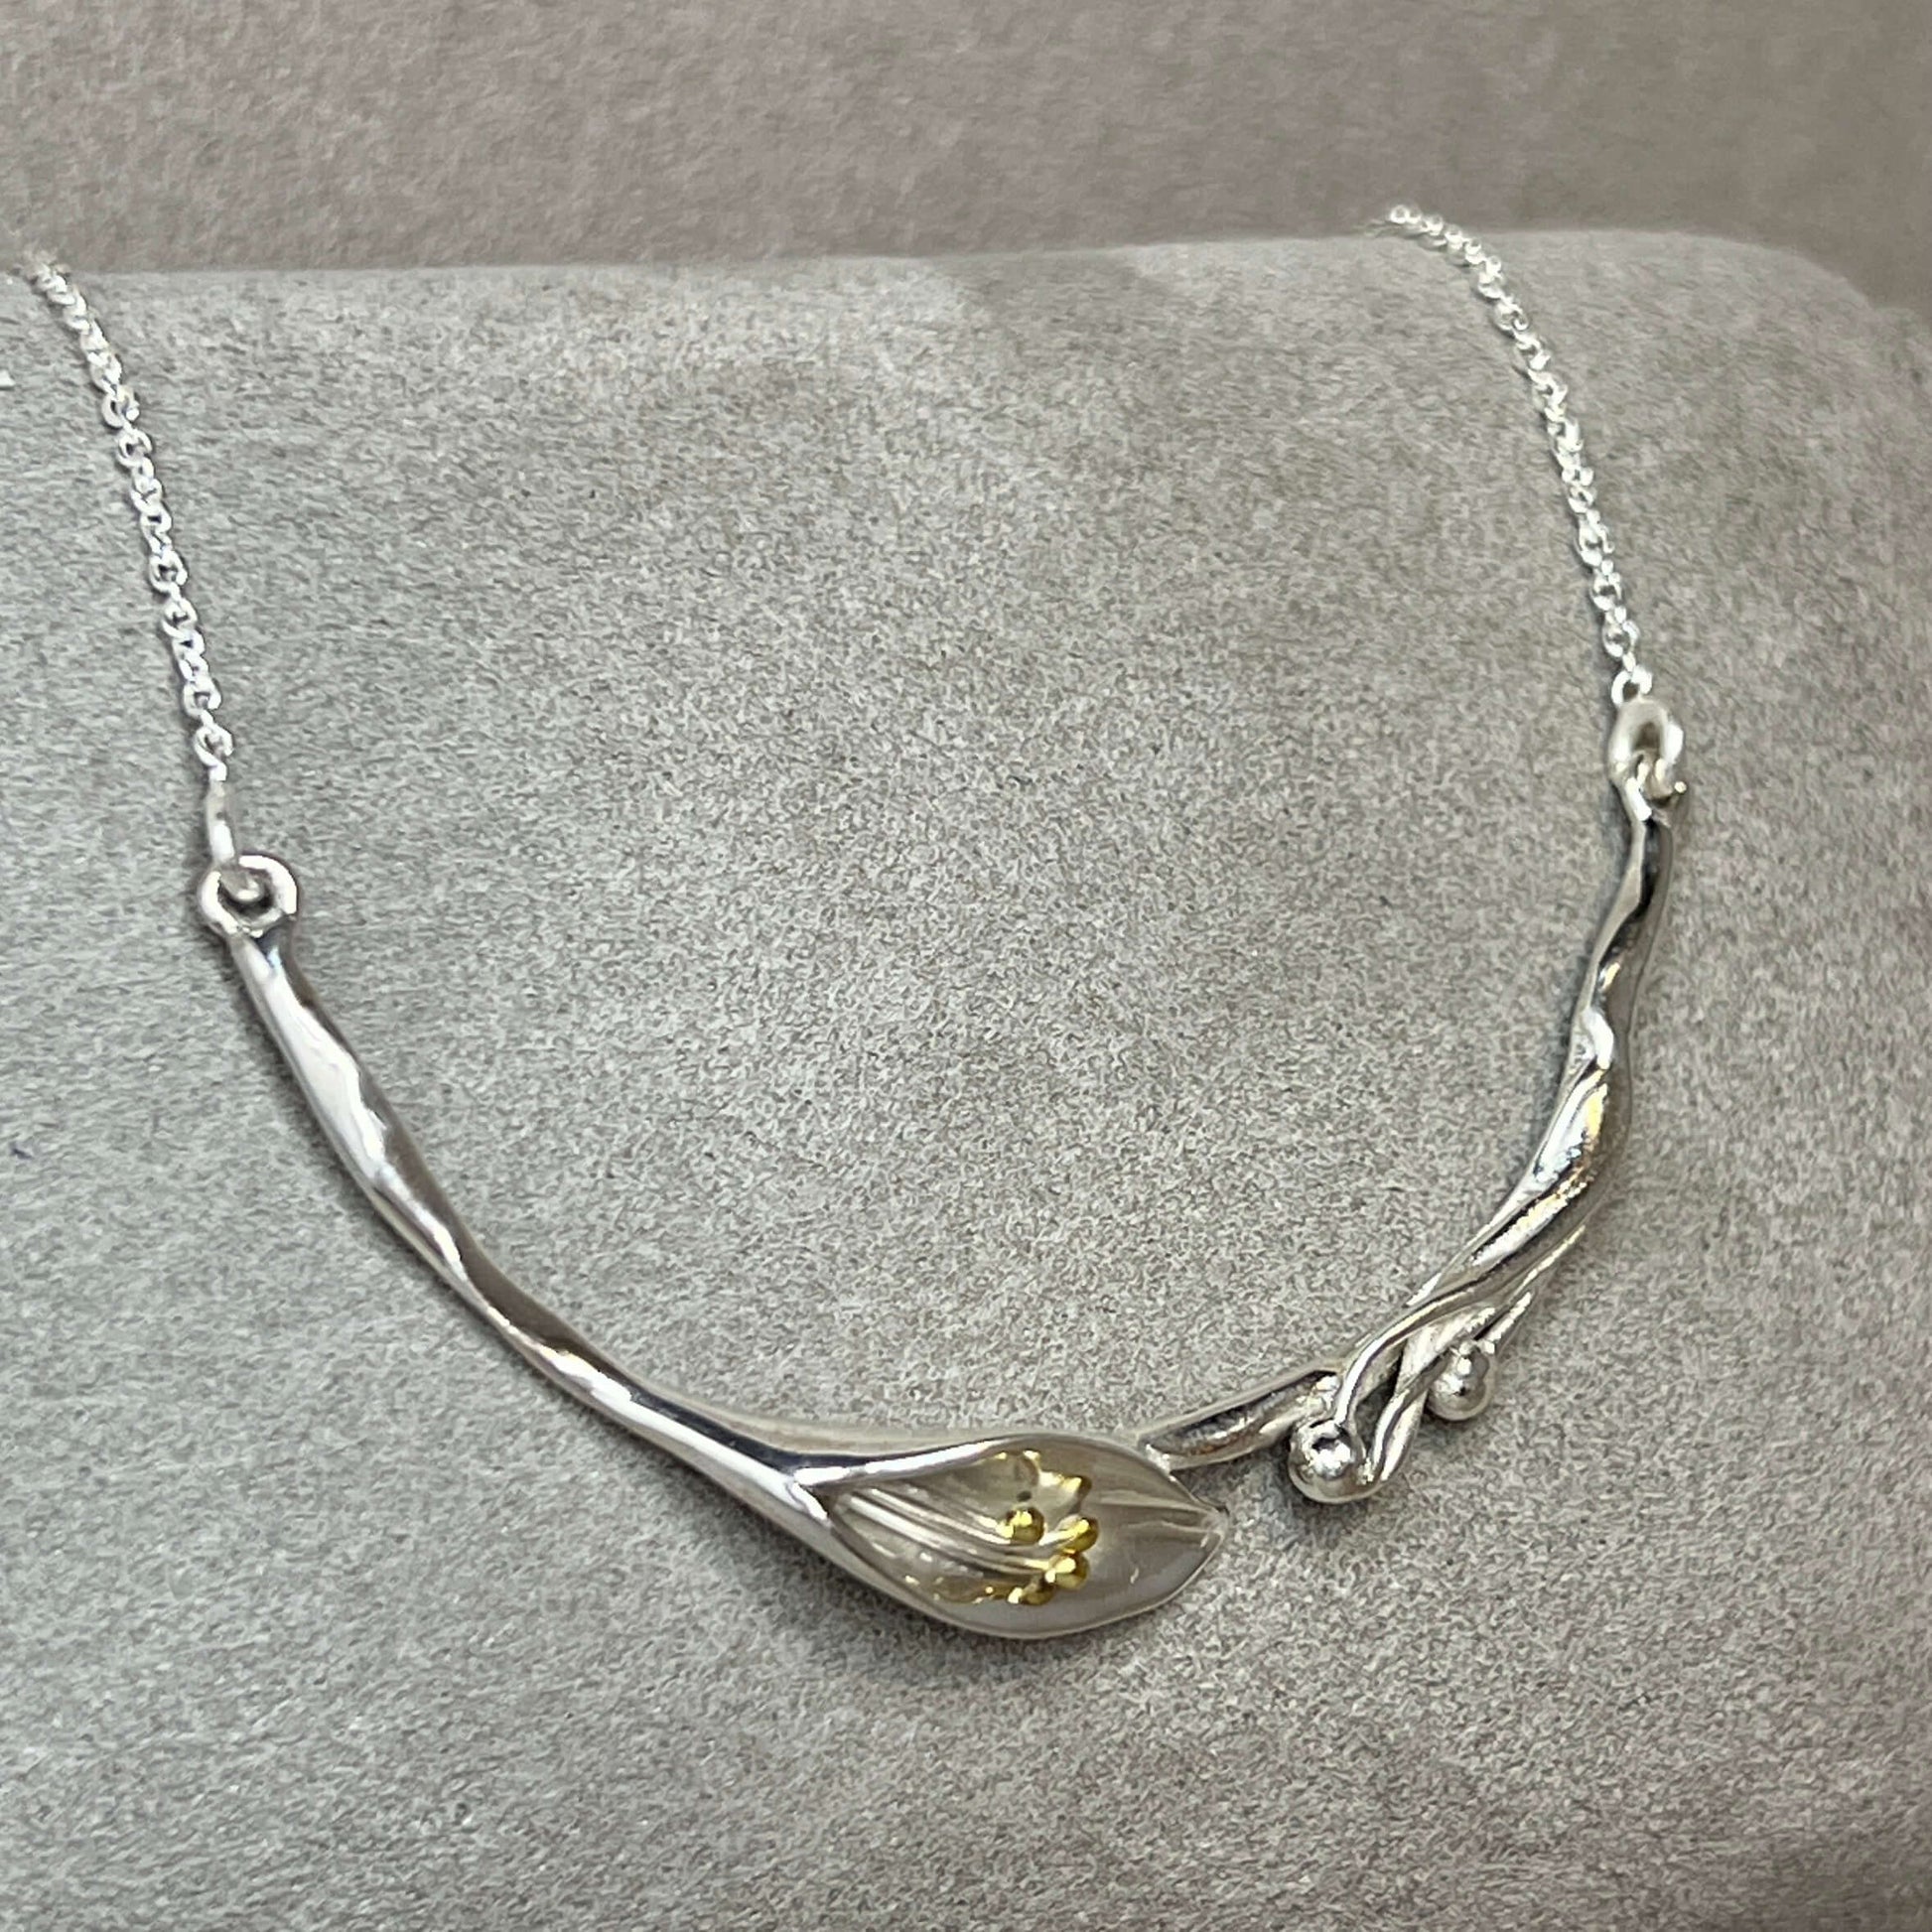 Elegant Calla Lily Handmade Bar Necklace in Sterling Silver & 14 Carat Gold - Twelve Silver Trees